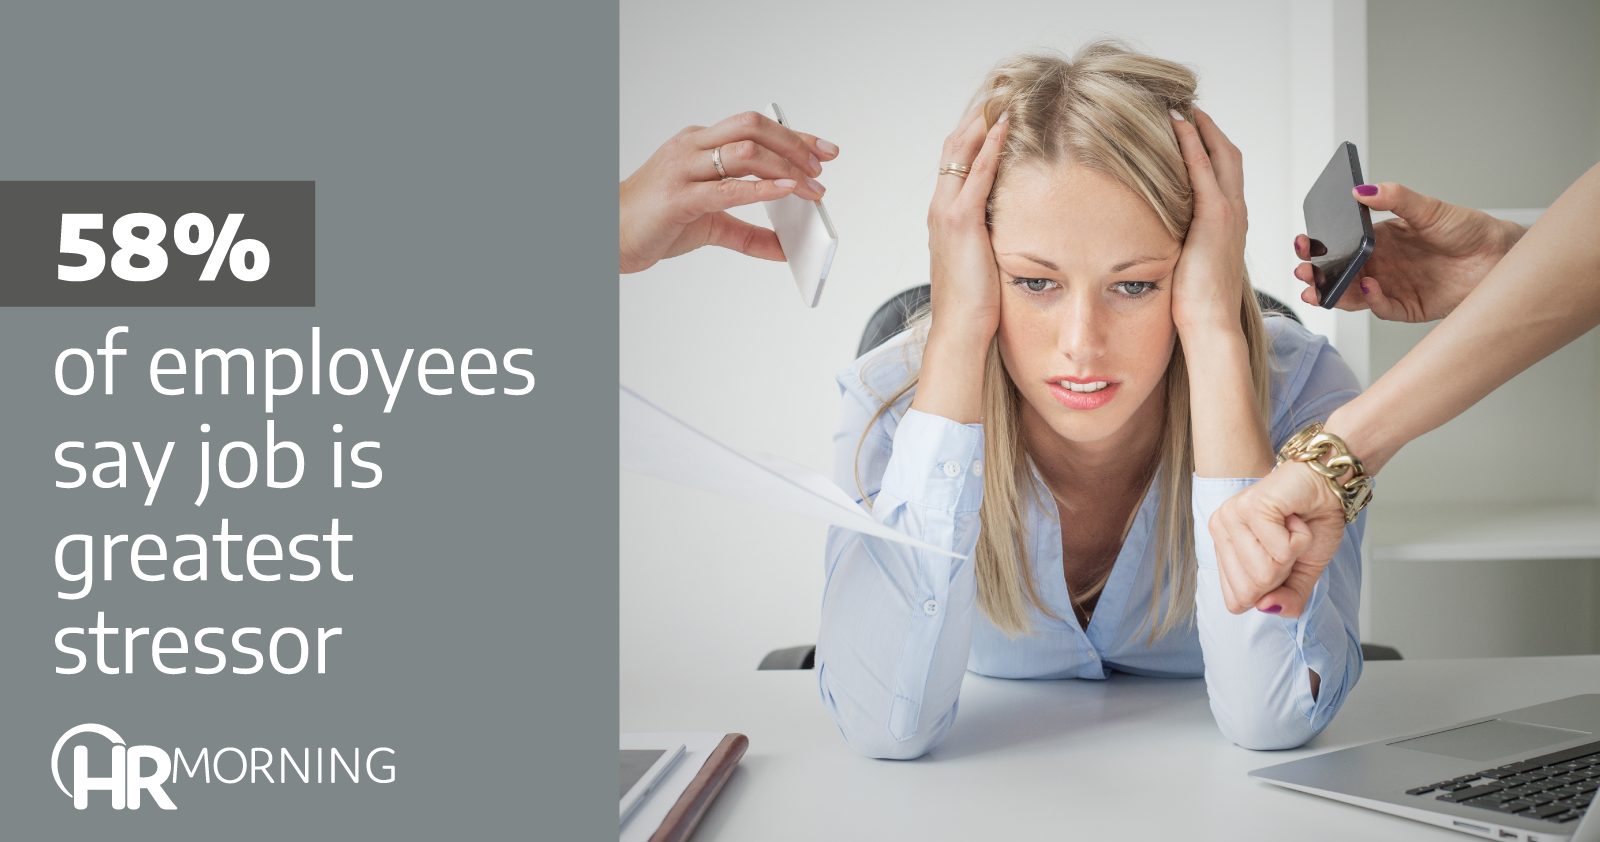 58 percent of employees say job is greatest stressor